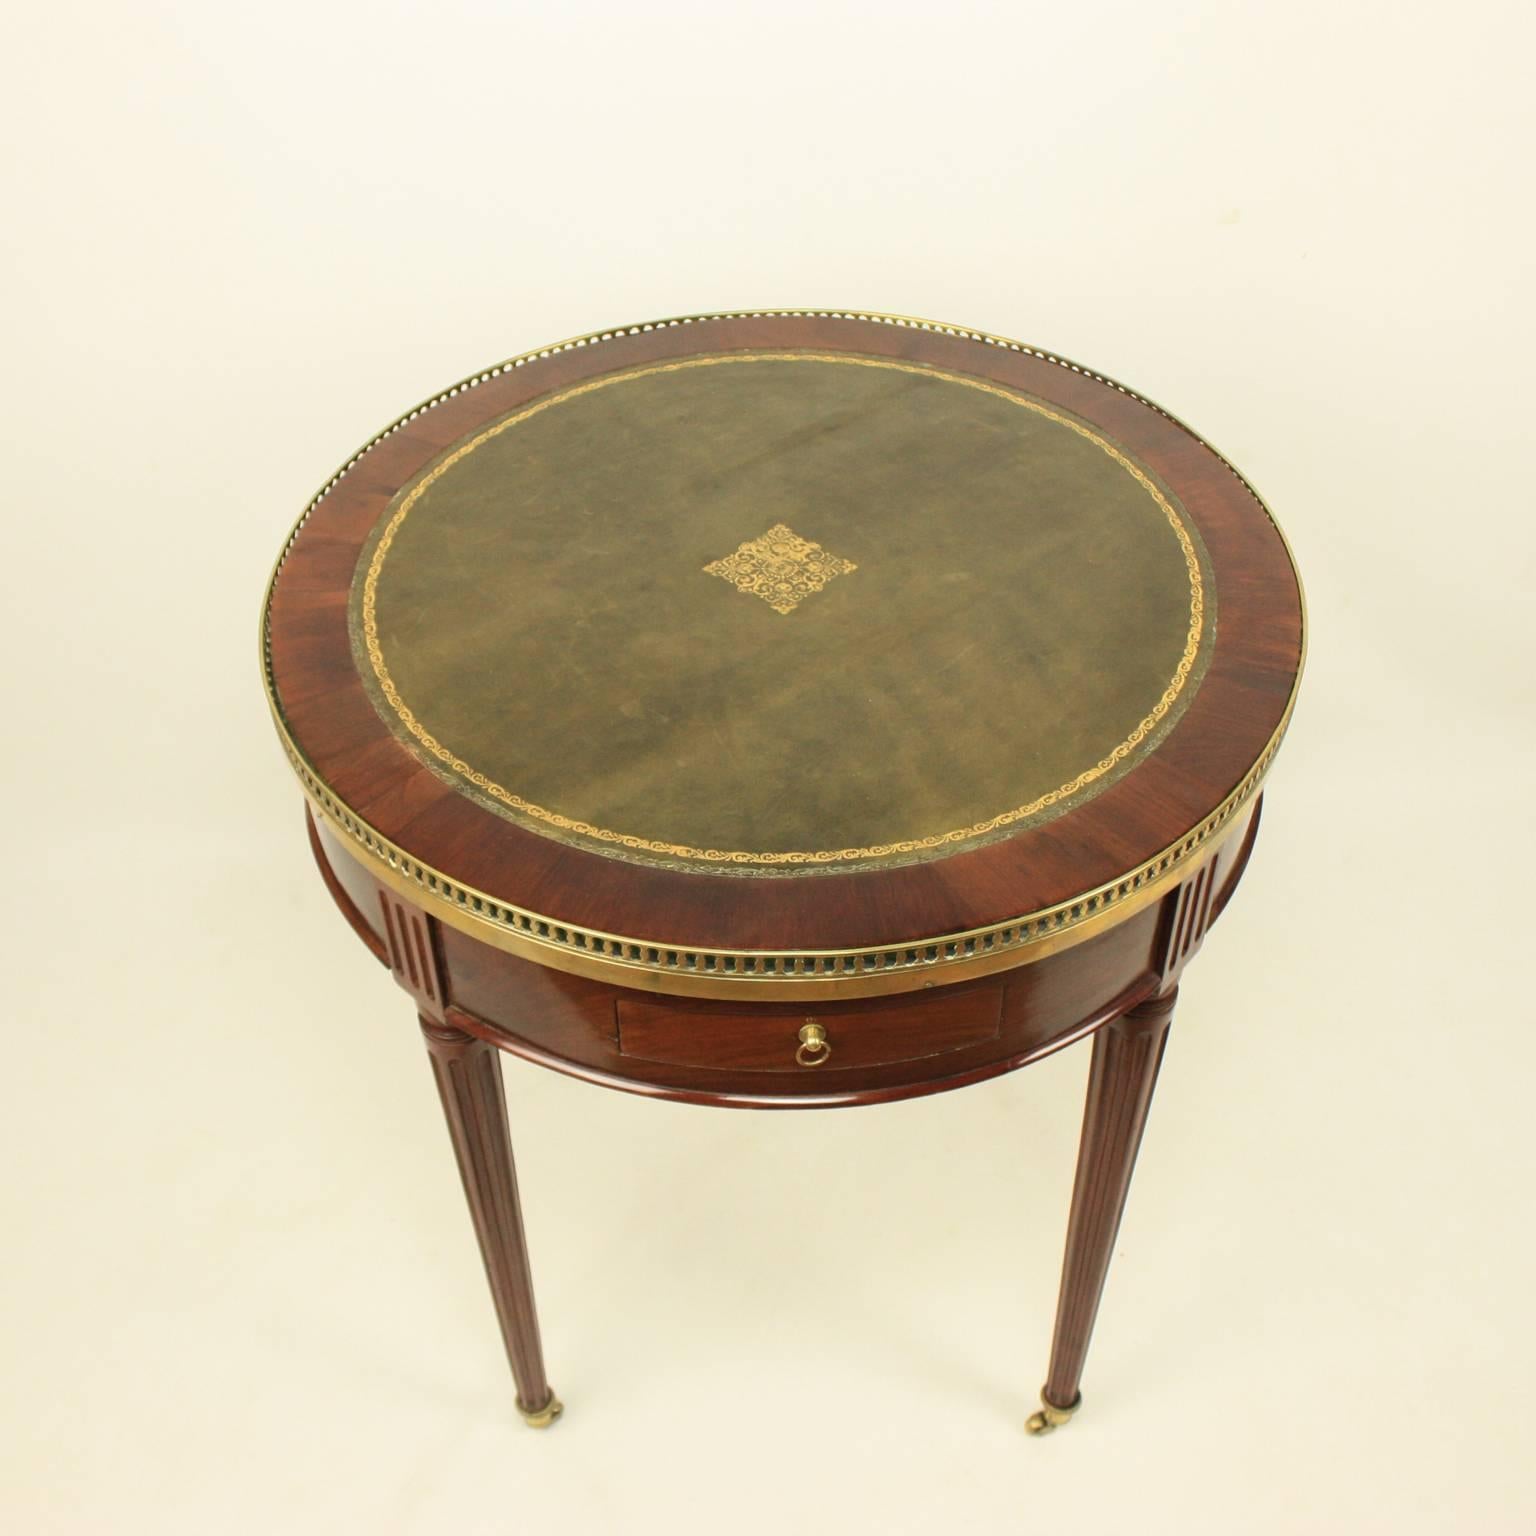 Directoire Late 18th Century Mahogany Bouillotte Table by J.J. Pafrat